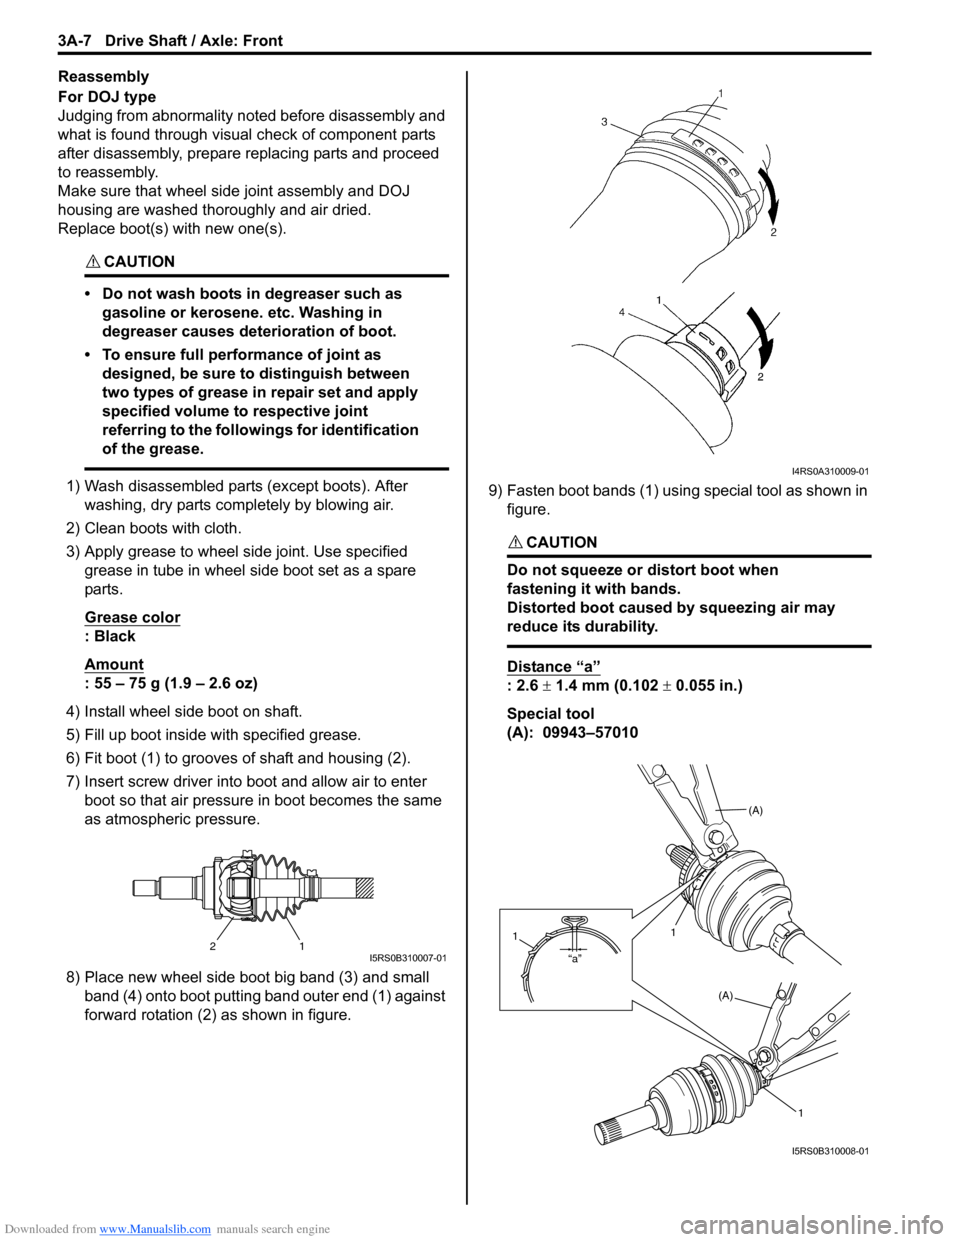 SUZUKI SX4 2006 1.G Service Owners Guide Downloaded from www.Manualslib.com manuals search engine 3A-7 Drive Shaft / Axle: Front
Reassembly
For DOJ type
Judging from abnormality noted before disassembly and 
what is found through visual chec